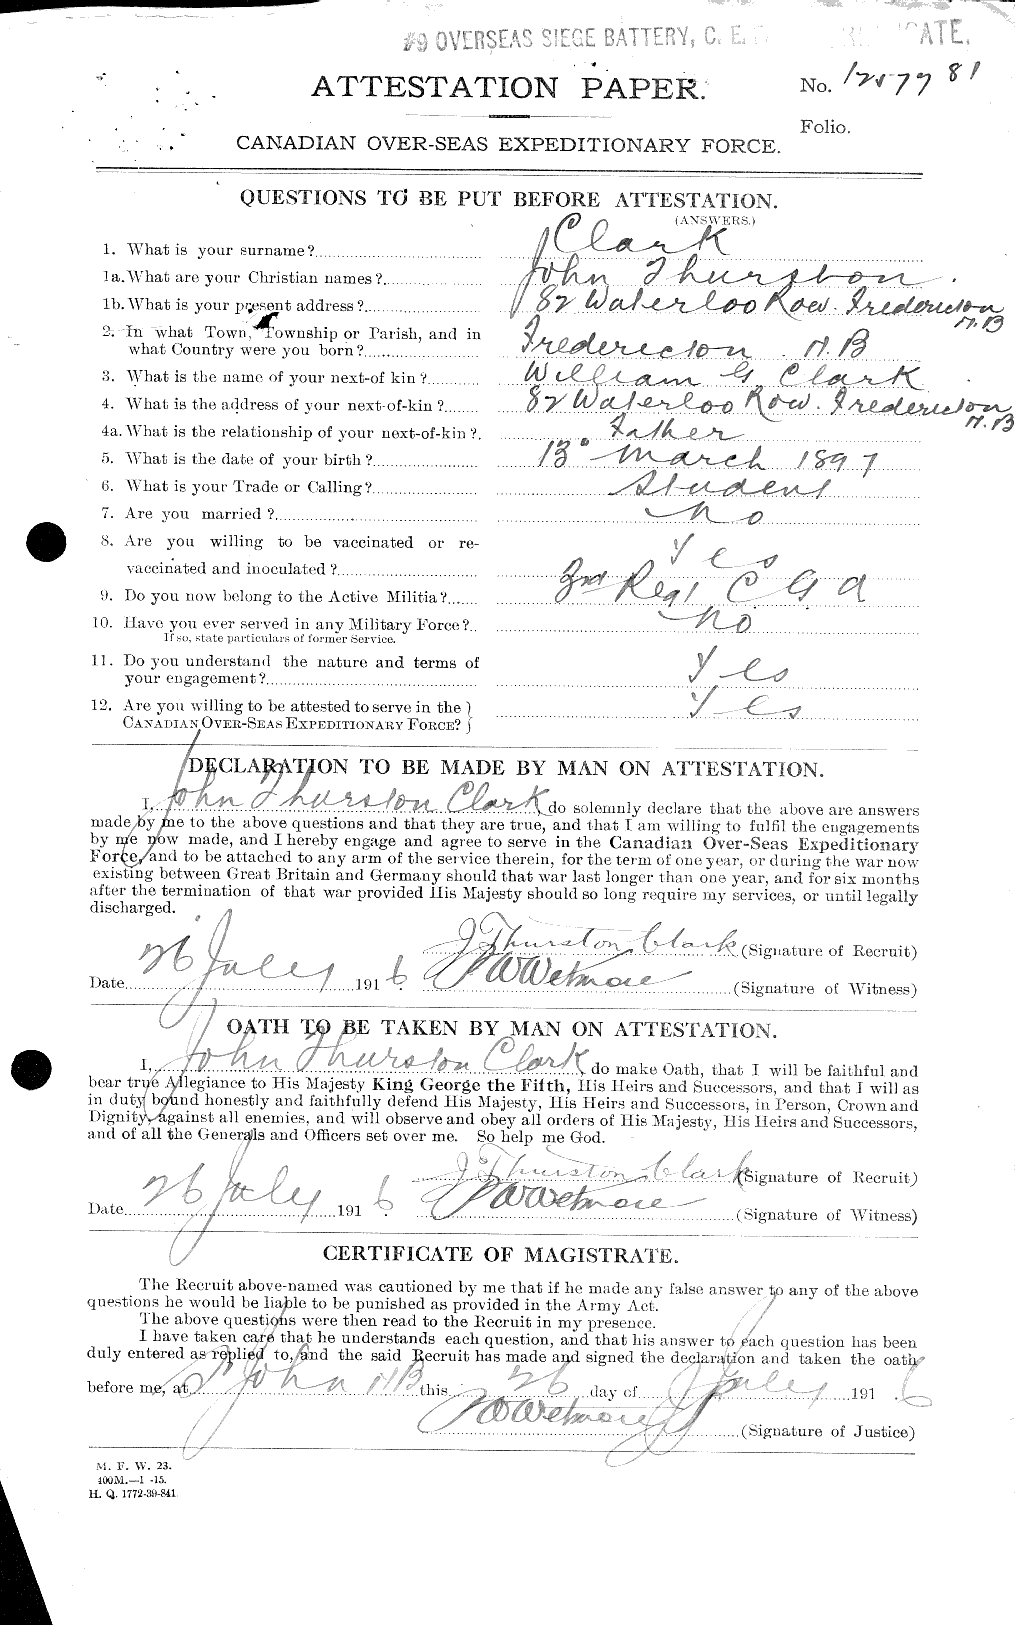 Personnel Records of the First World War - CEF 024677a